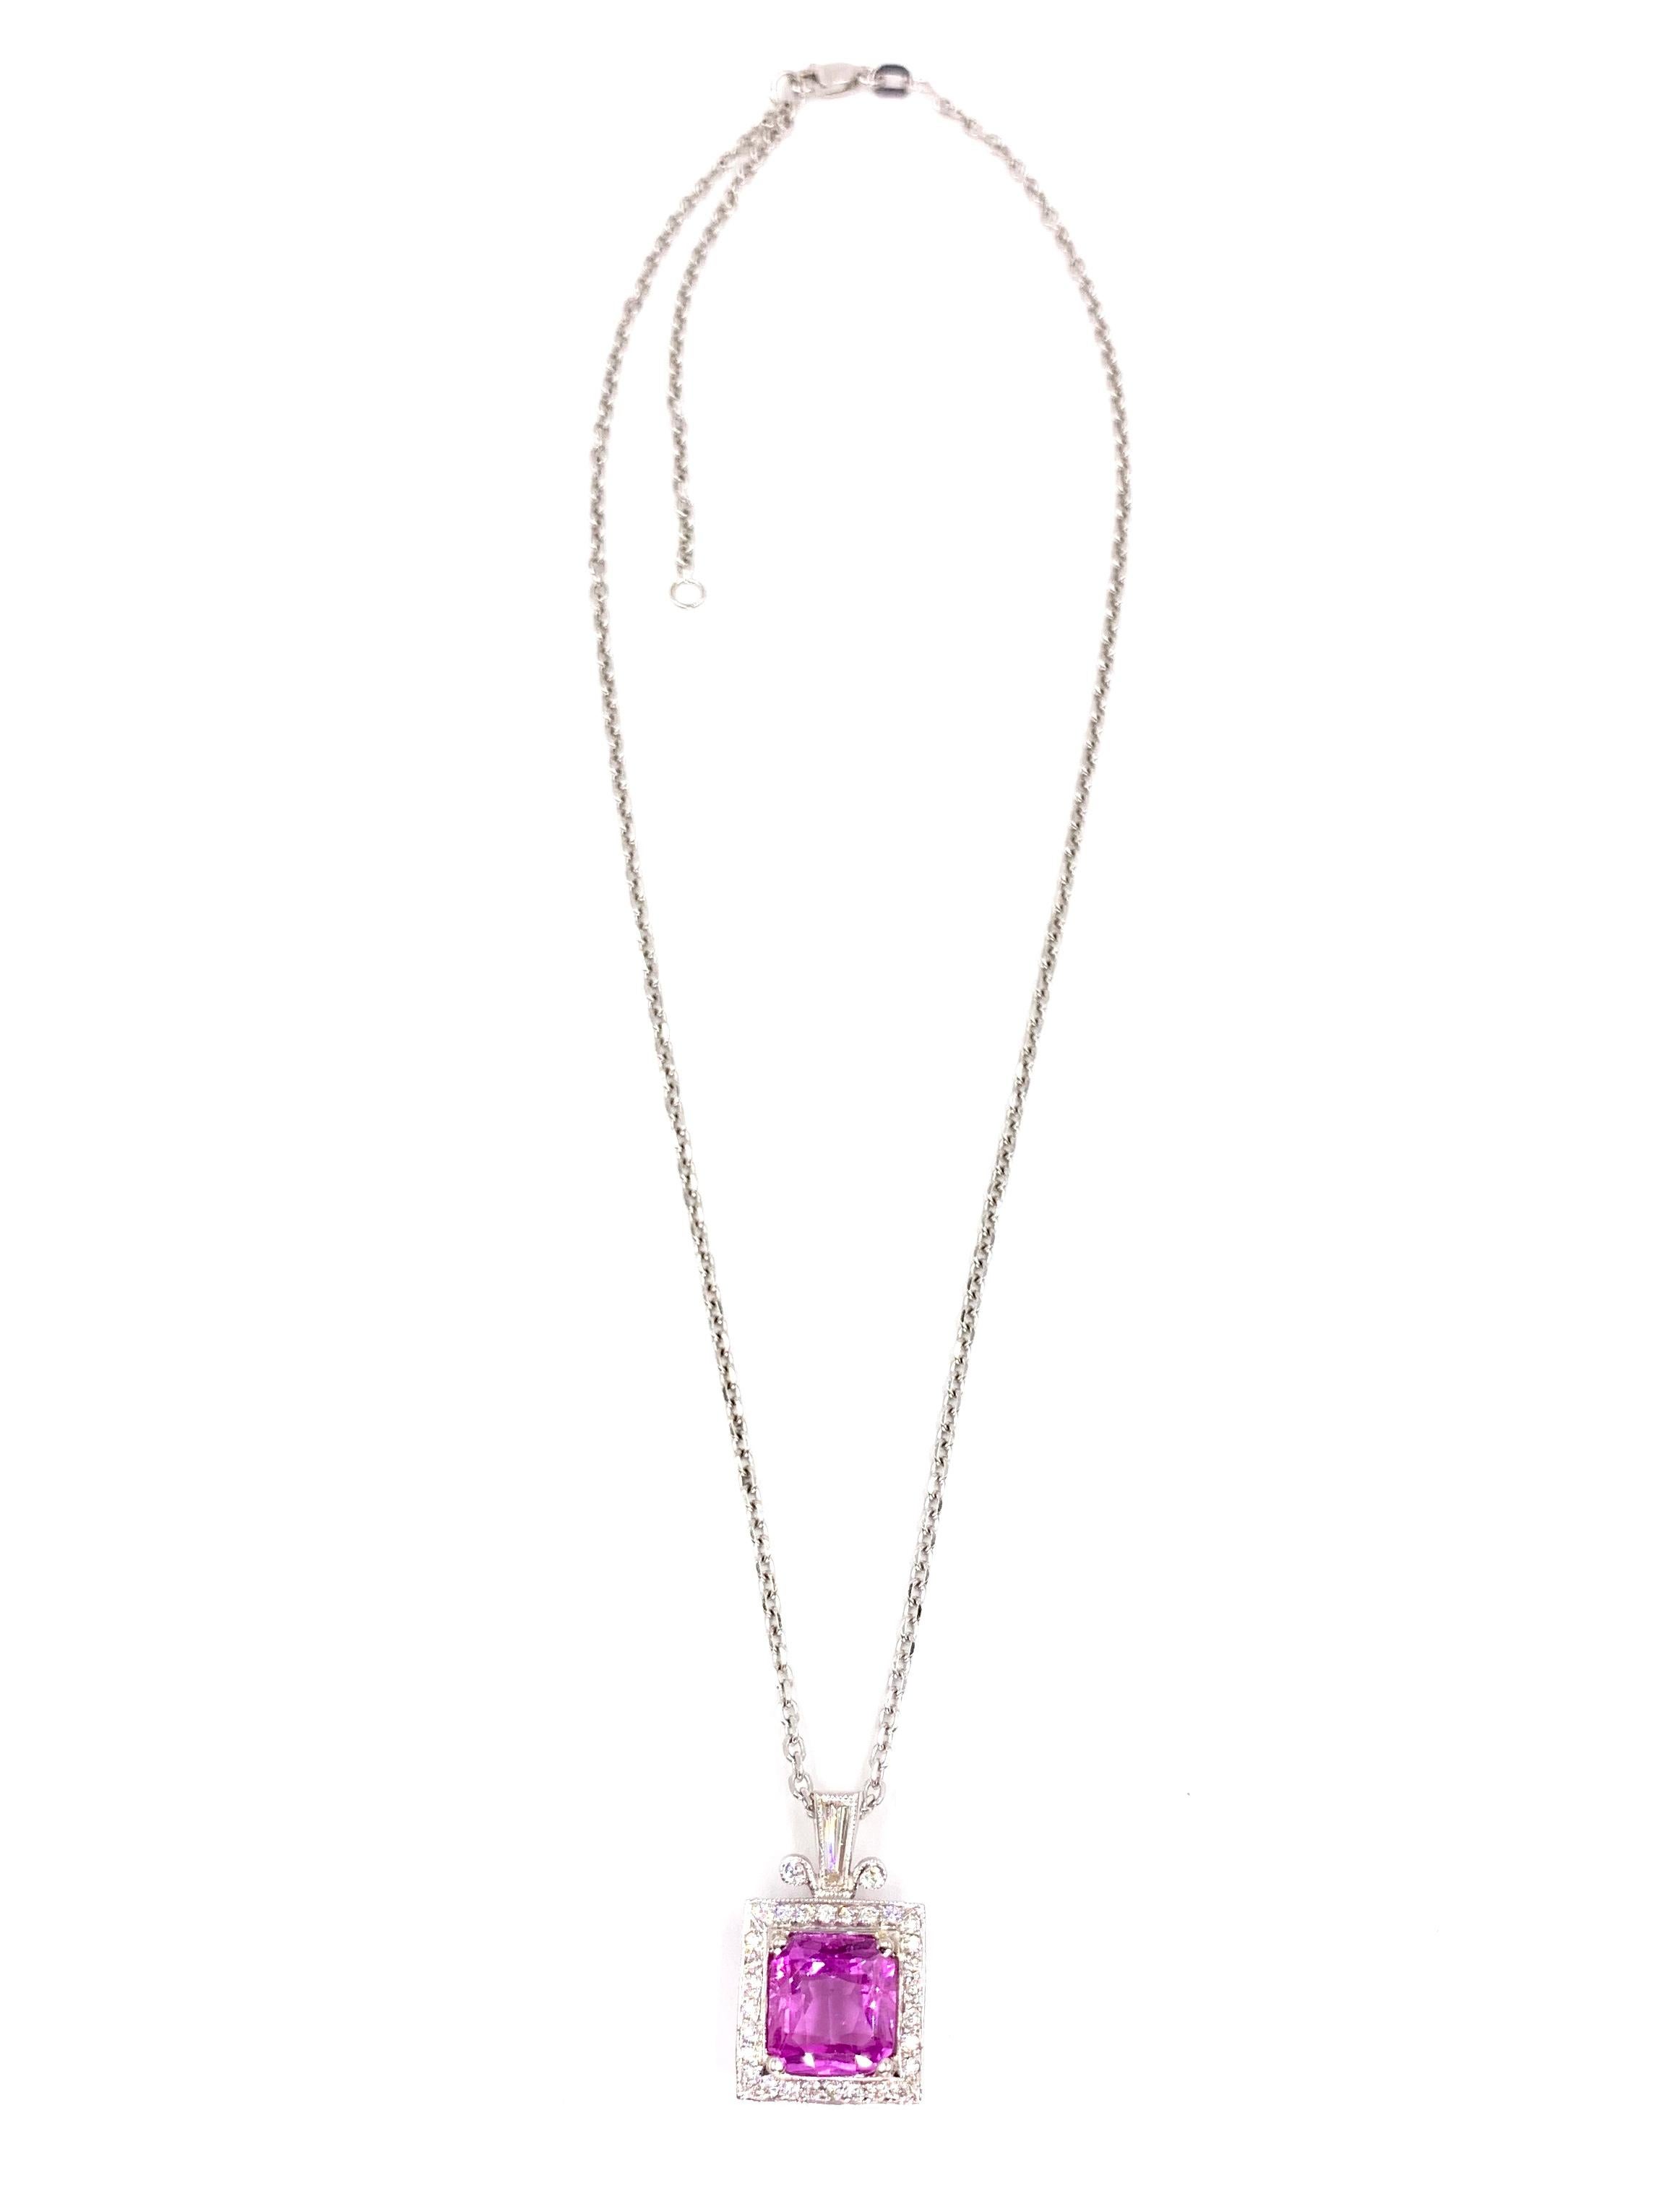 A cushion shape 4.74 carat intense pink sapphire is beautifully surrounded by an antiqued square halo of diamonds topped with a baguette cut adorned bale on this exquisite 18 karat white gold pendant. Pendant has a total diamond weight of 1 carat